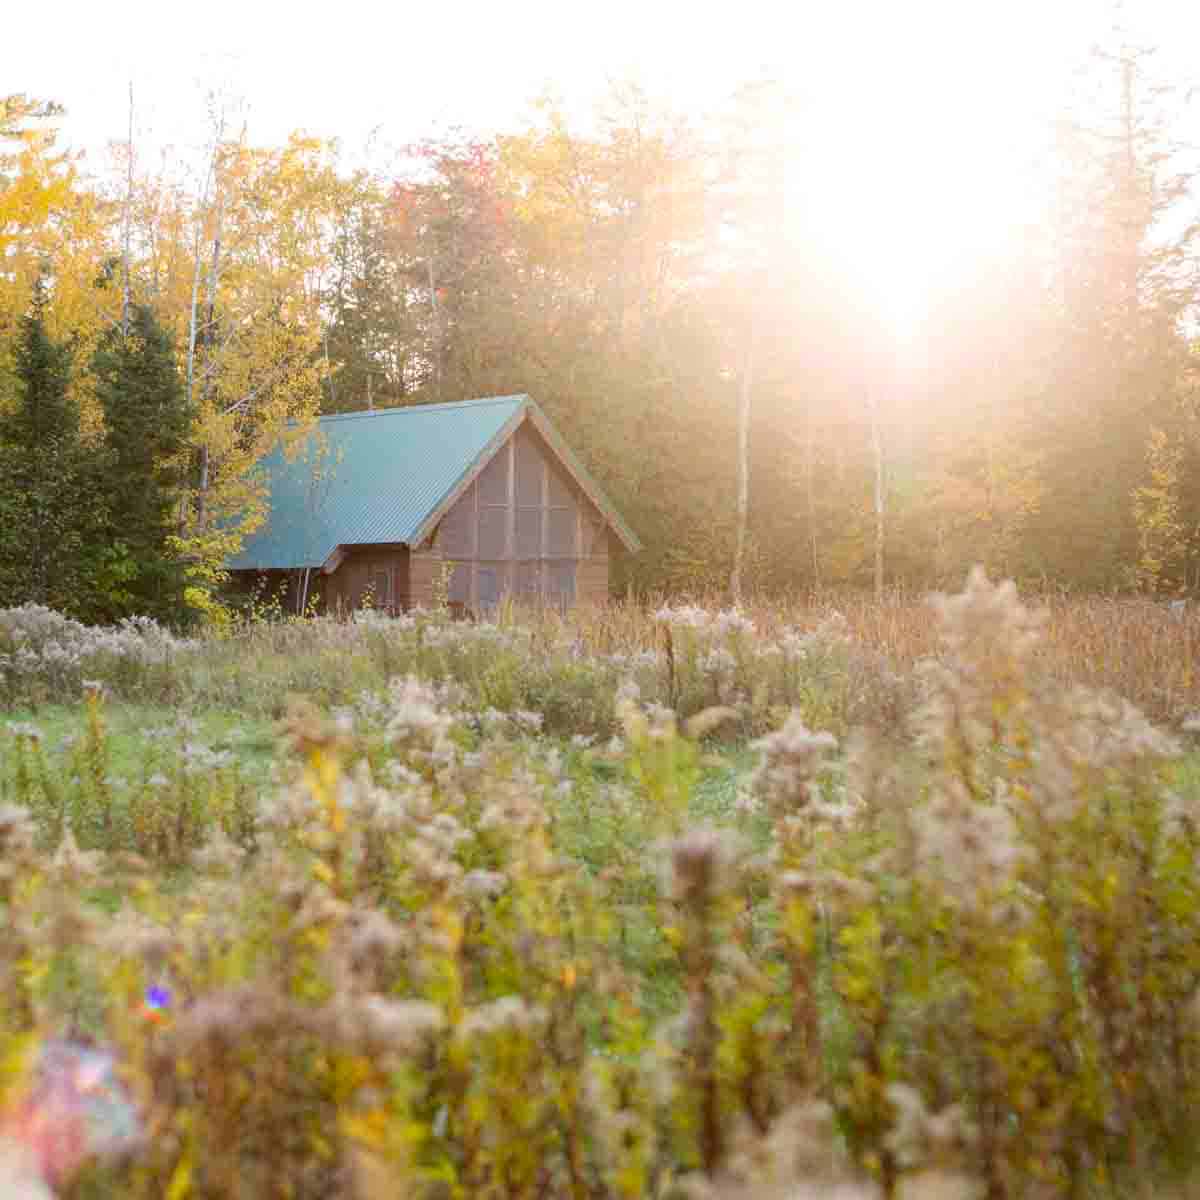 Cabin in Wisconsin between a field and forest.